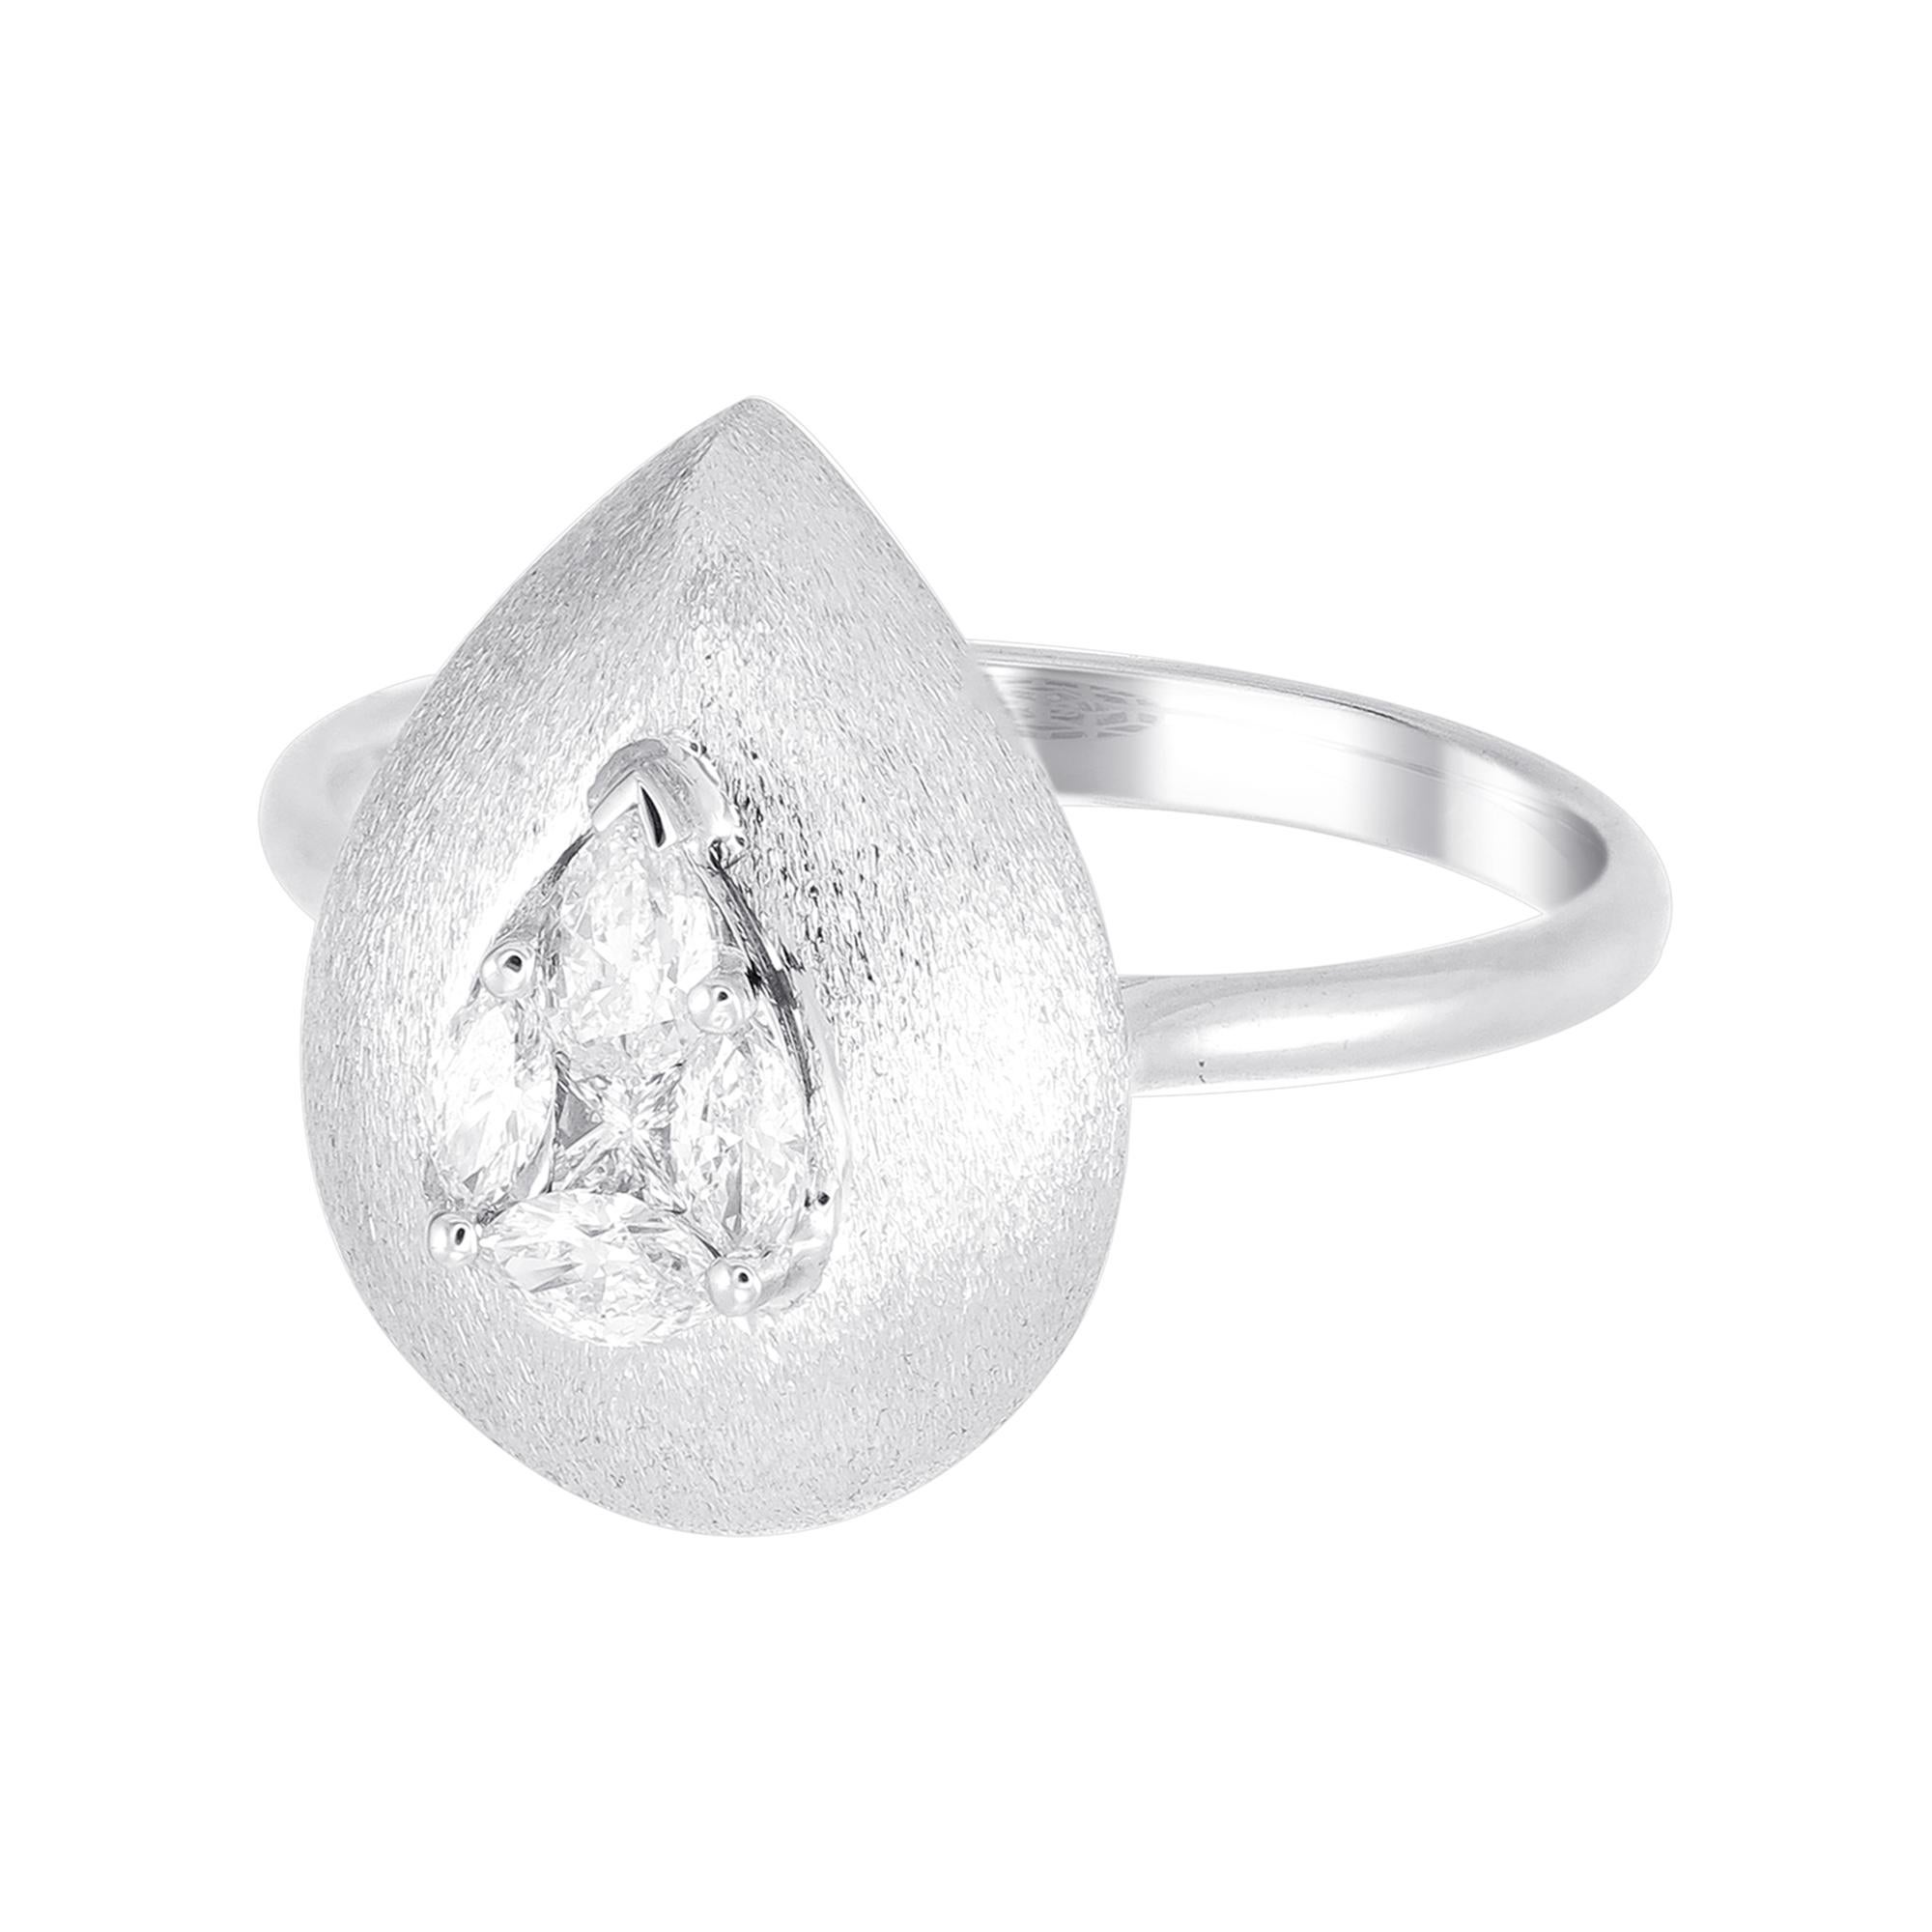 This 18K White Gold cocktail ring features a luscious Pear shape White Diamond Illusion. Combine with glamorous outfits for a show-stopping effect. Each diamond hand-selected by our experts for its superior luster and surface quality.

Our diamonds